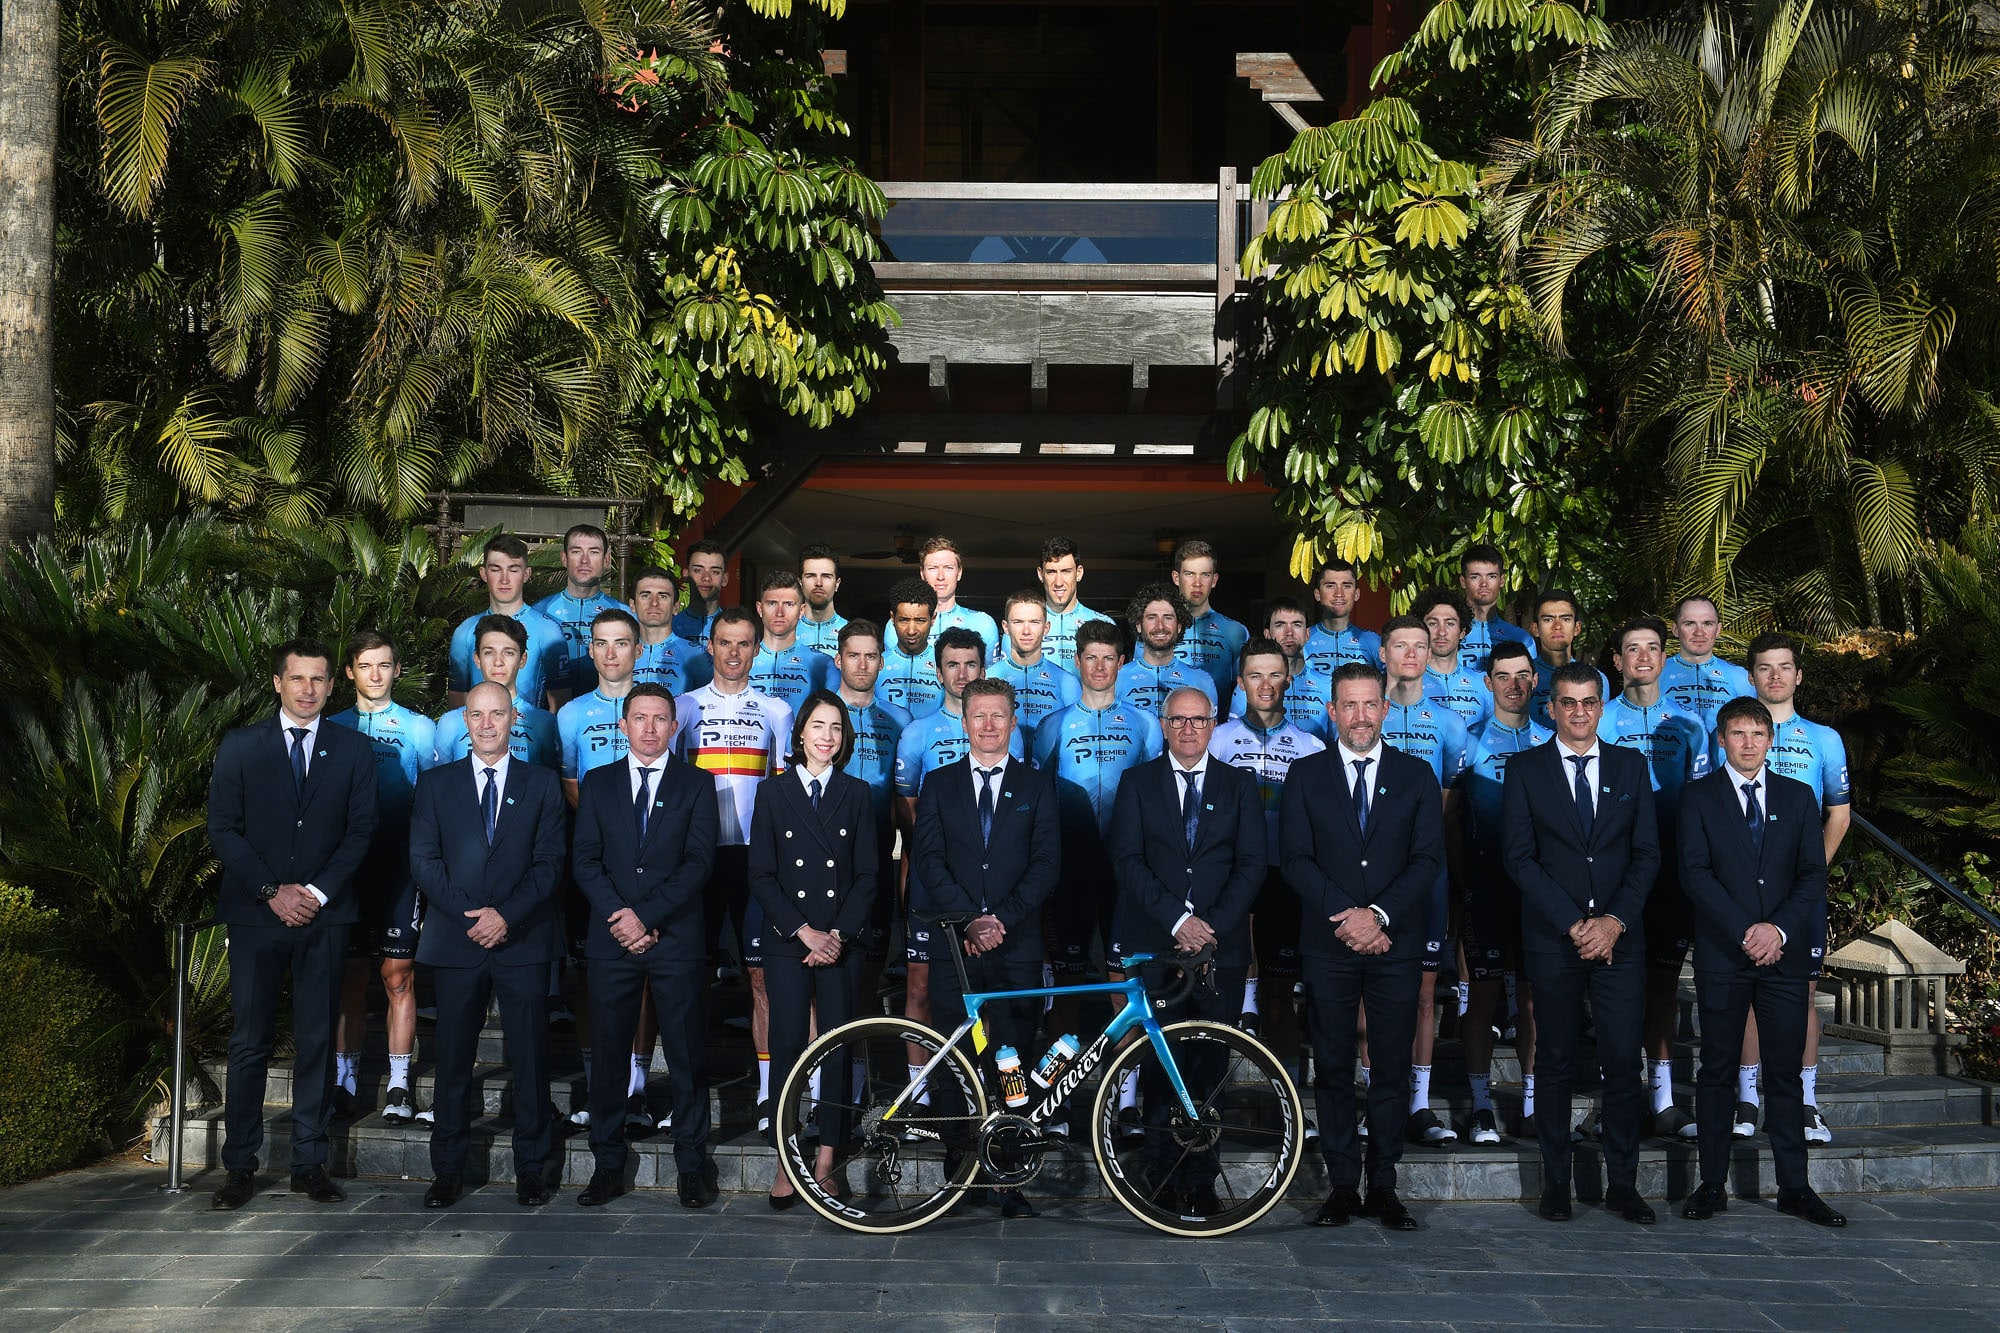 Astana - PremierTech and Wilier Triestina in 2021: Young riders and new bicycles